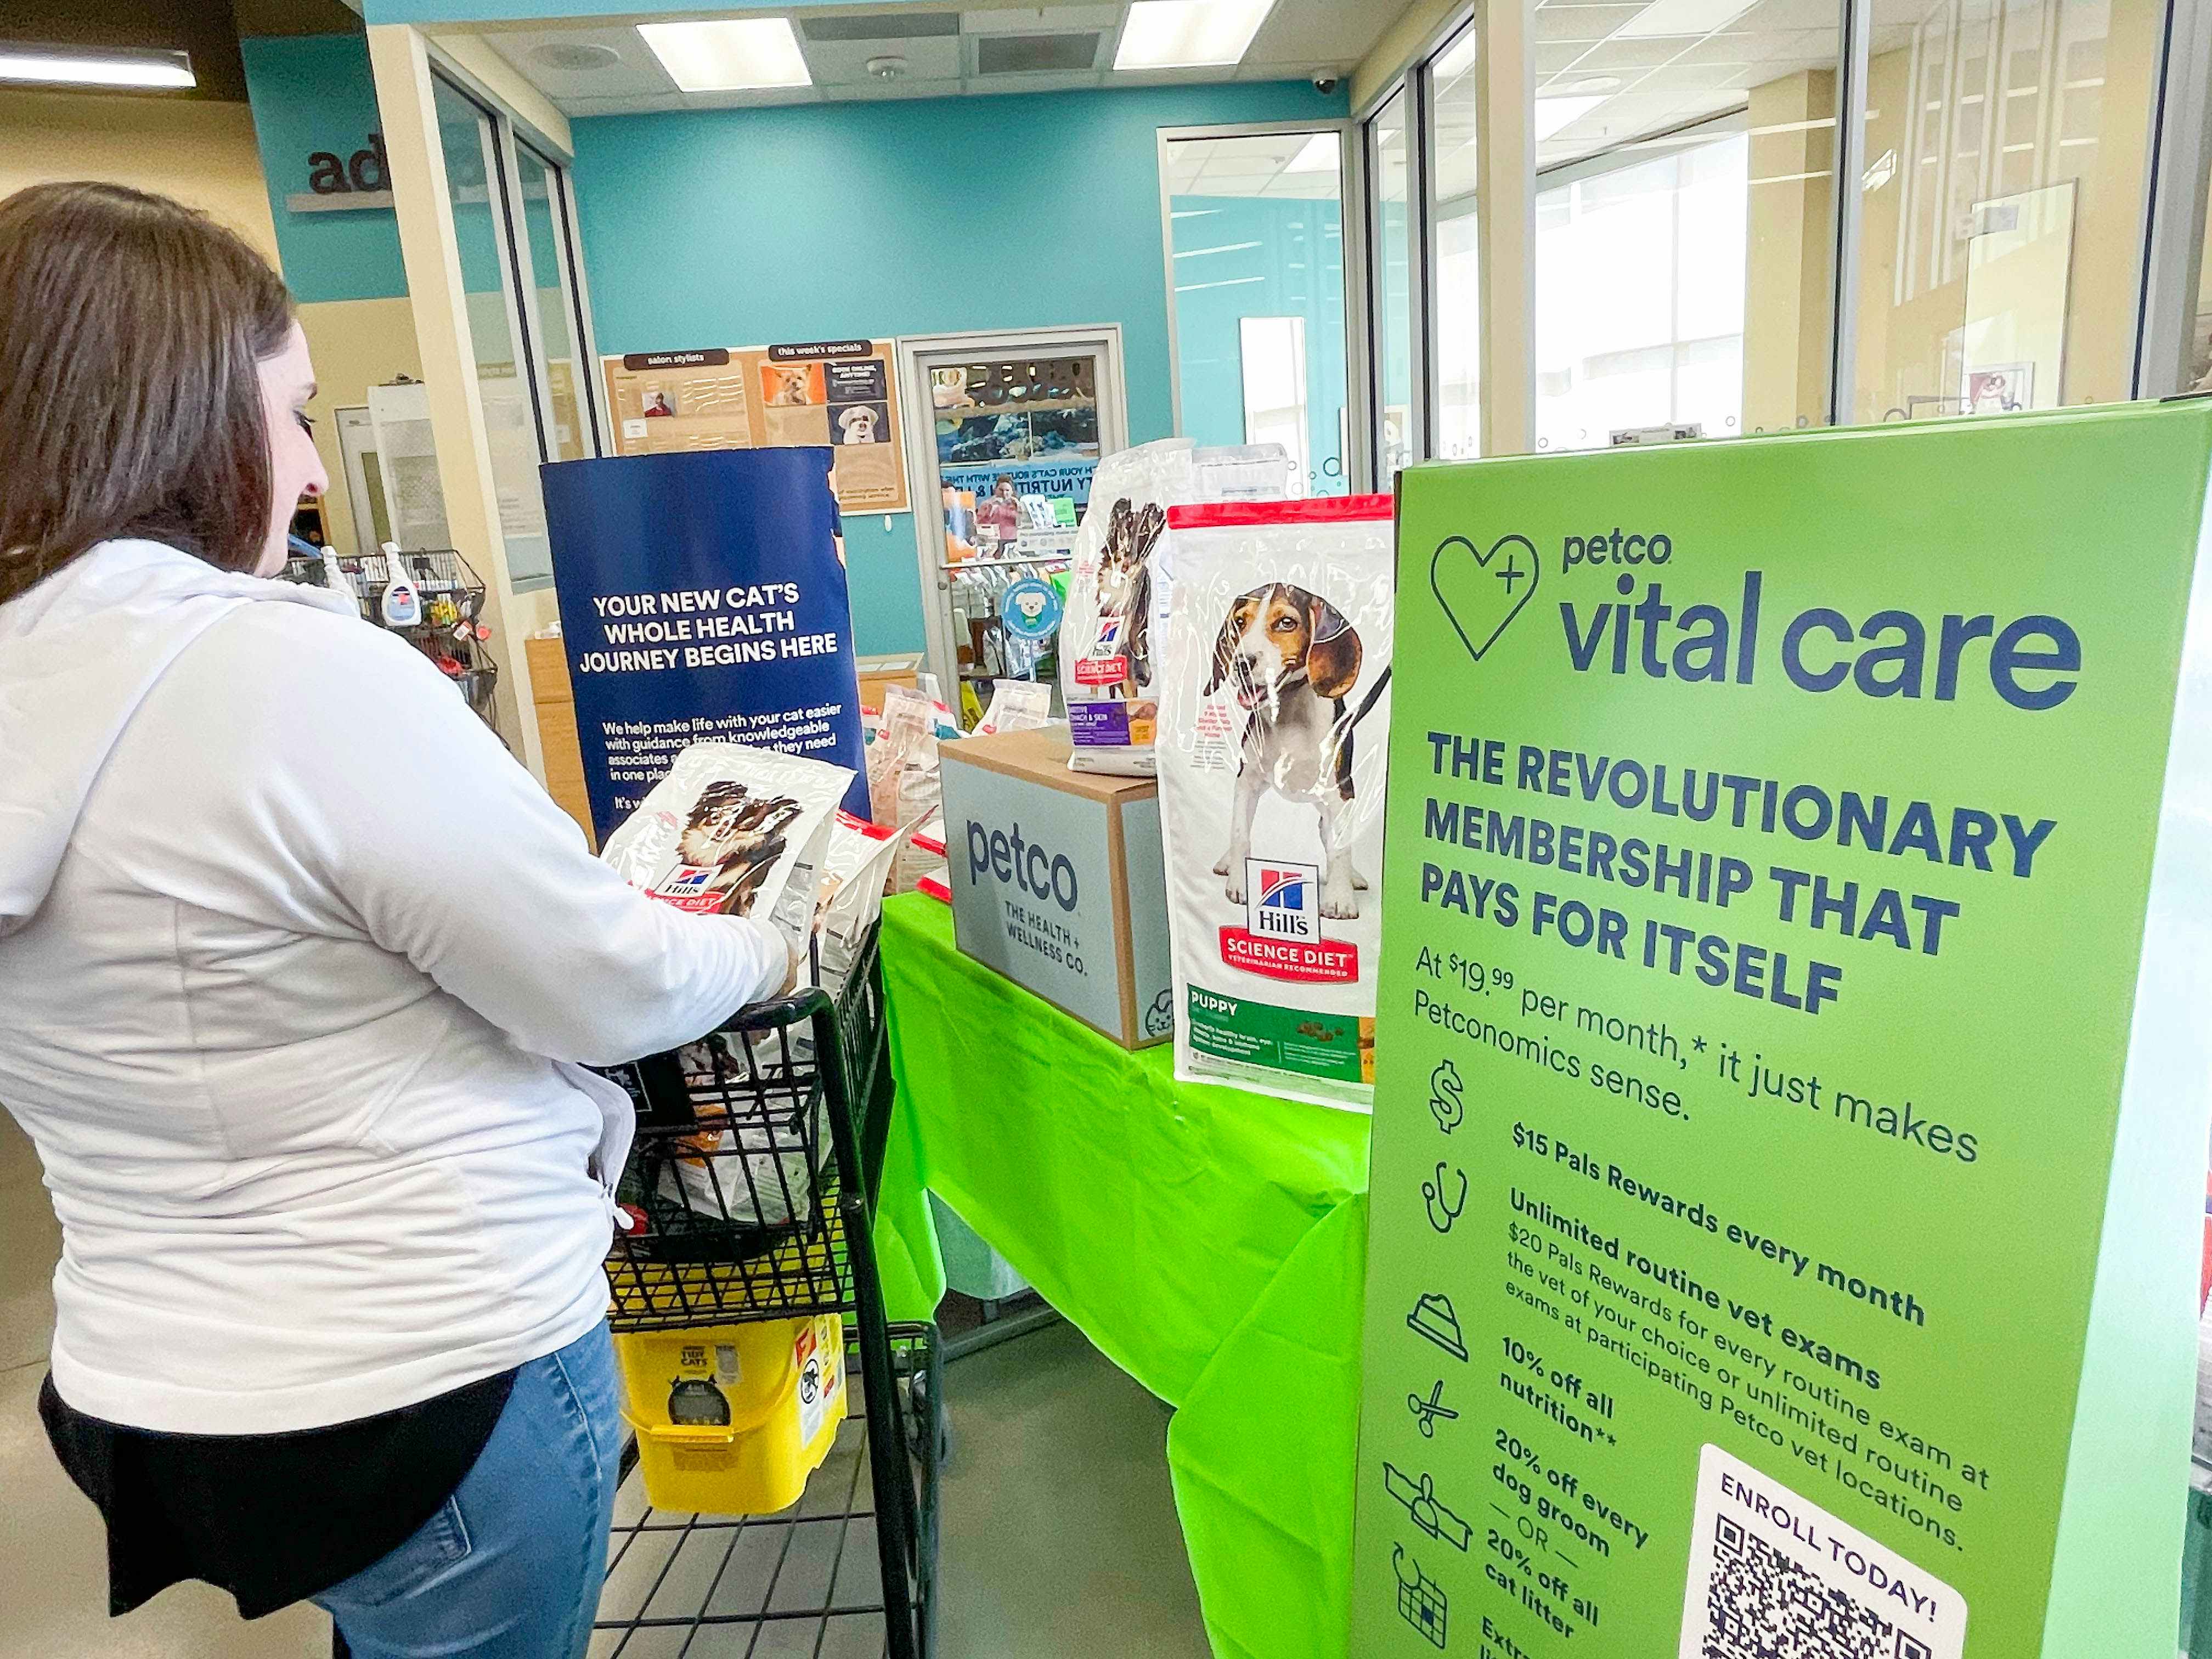 a person pushing a shopping cart in petco store near large vital care sign